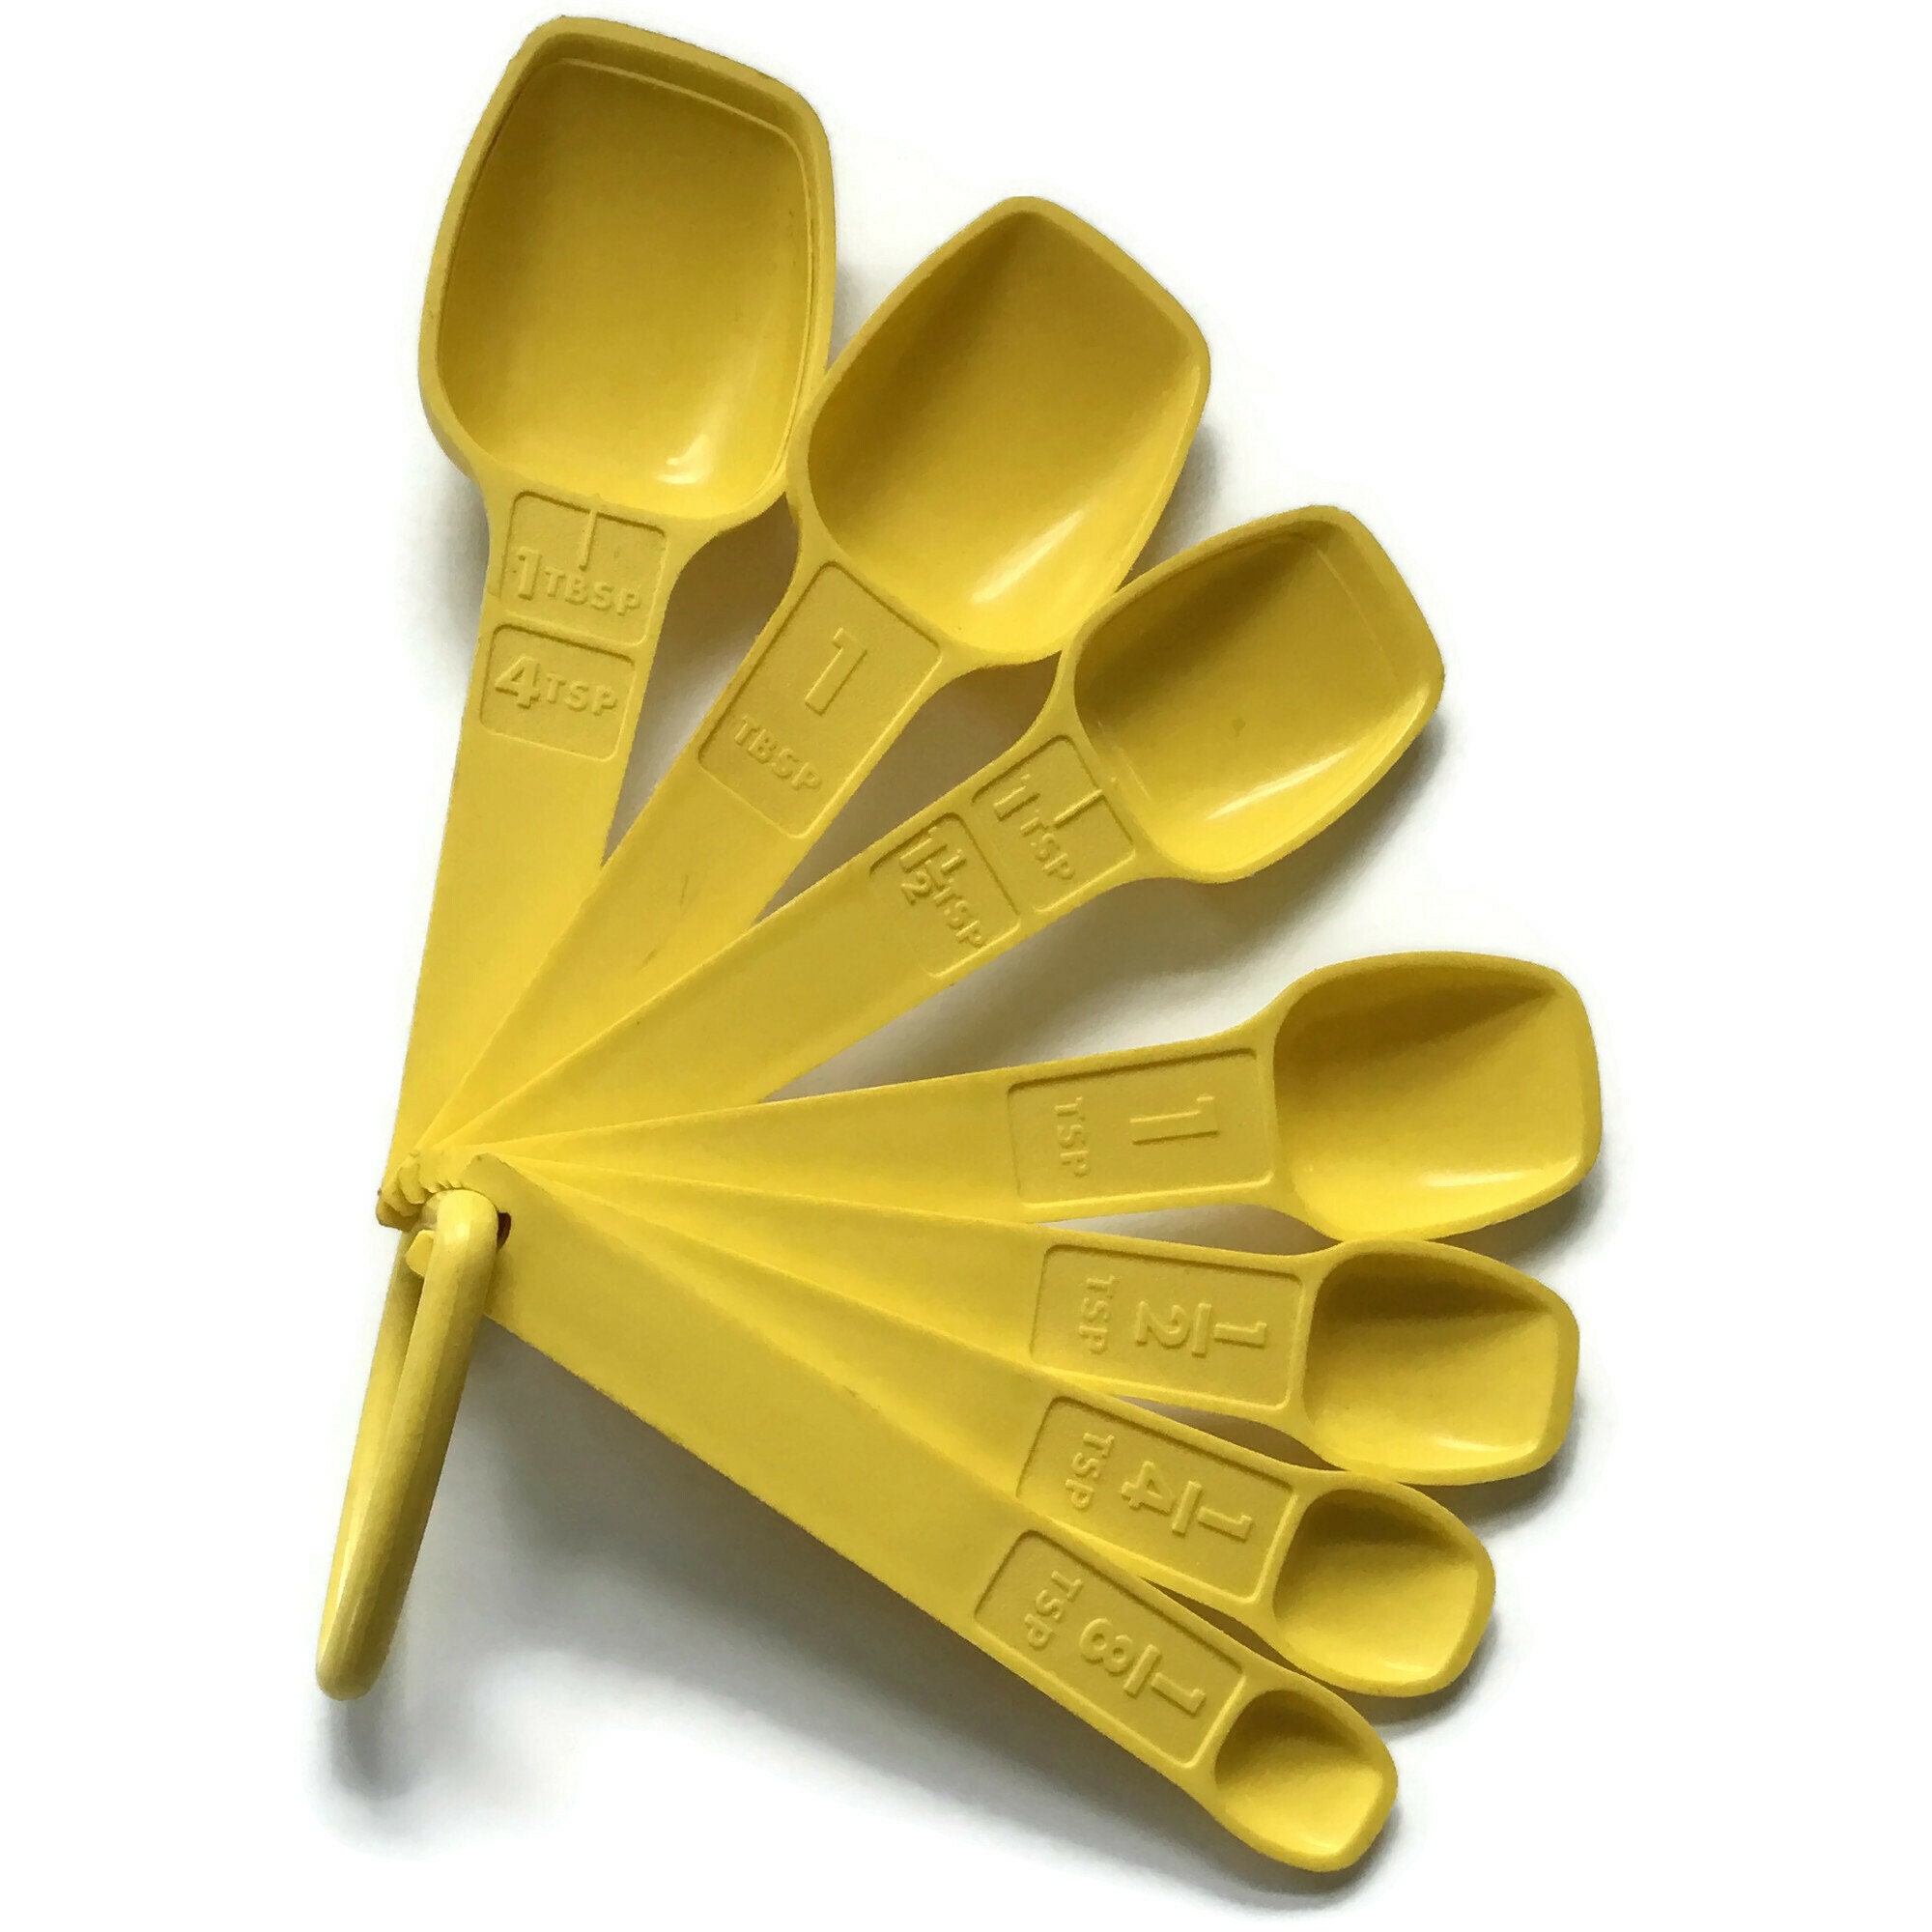 TUPPERWARE MEASURING SPOONS - Lil Dusty Online Auctions - All